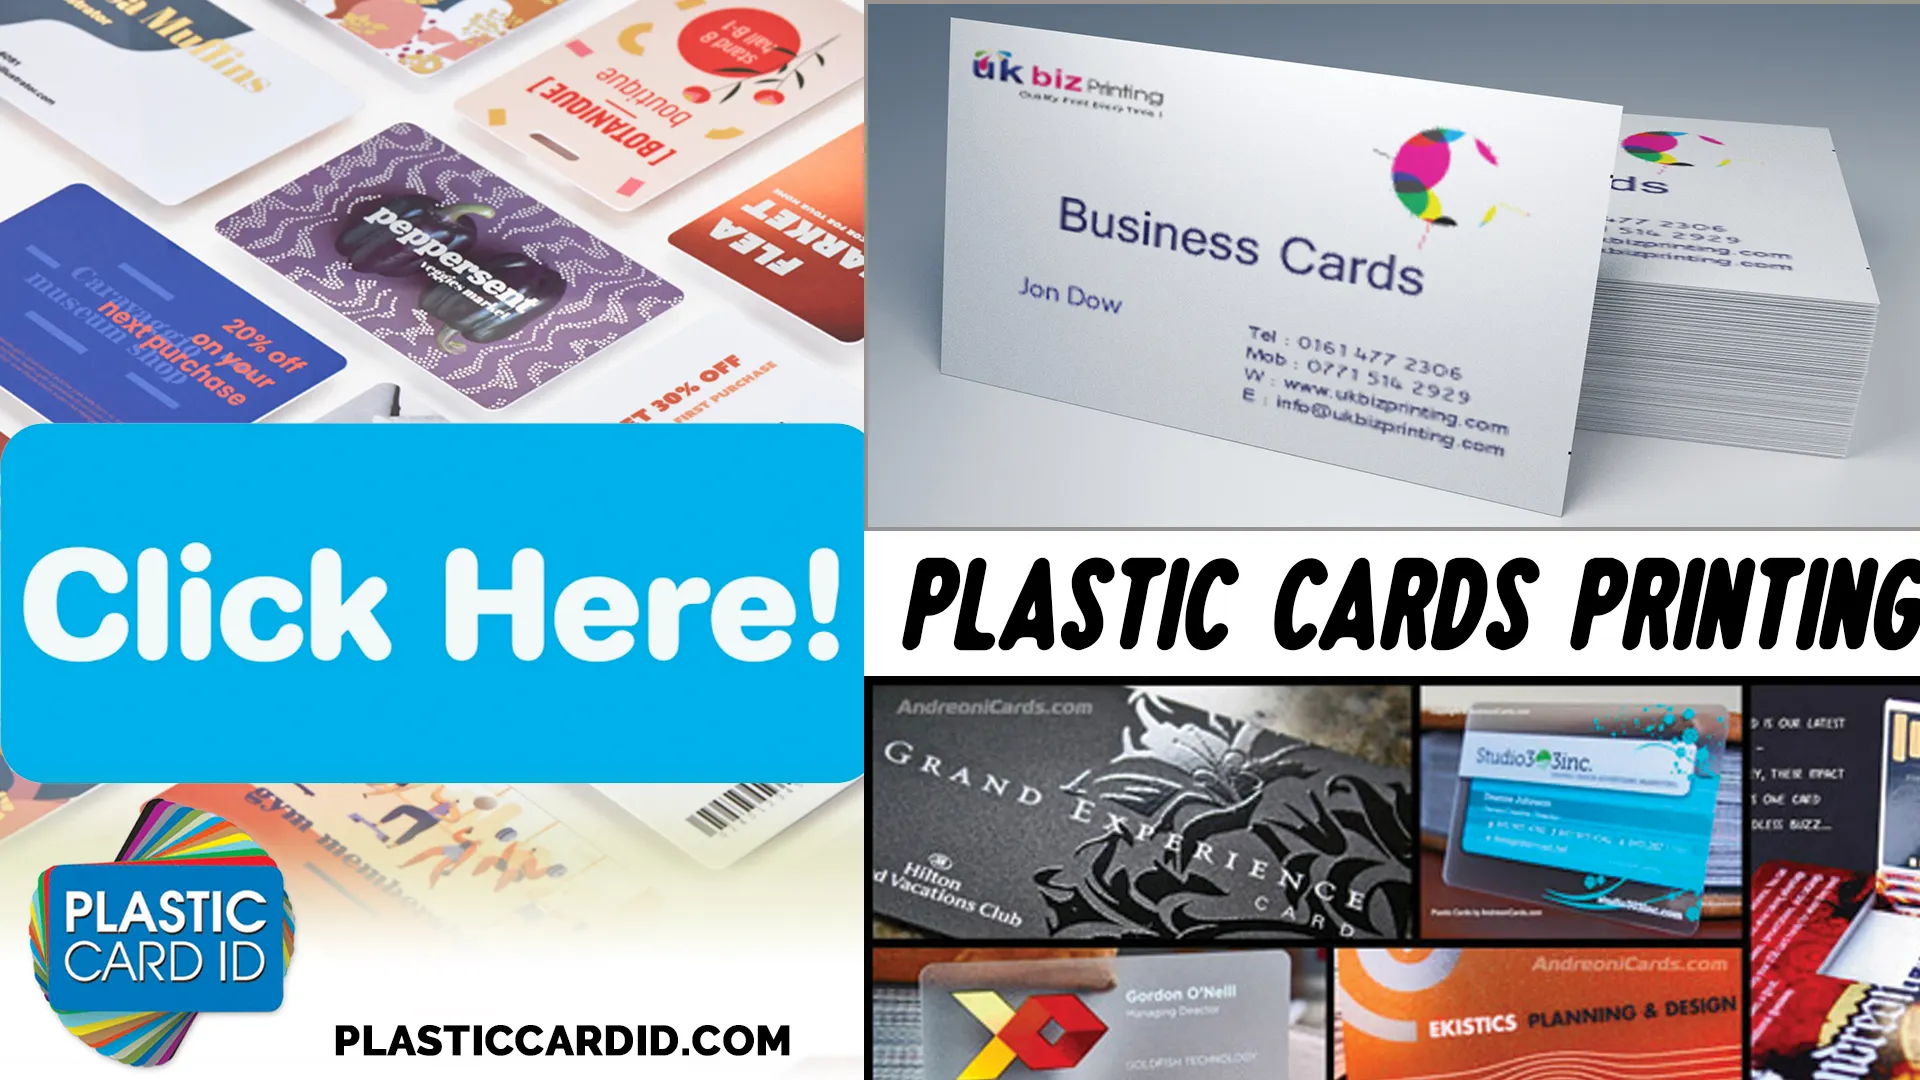 Welcome to Plastic Card ID




, Your Trusted Partner for Plastic Cards and Printing Solutions